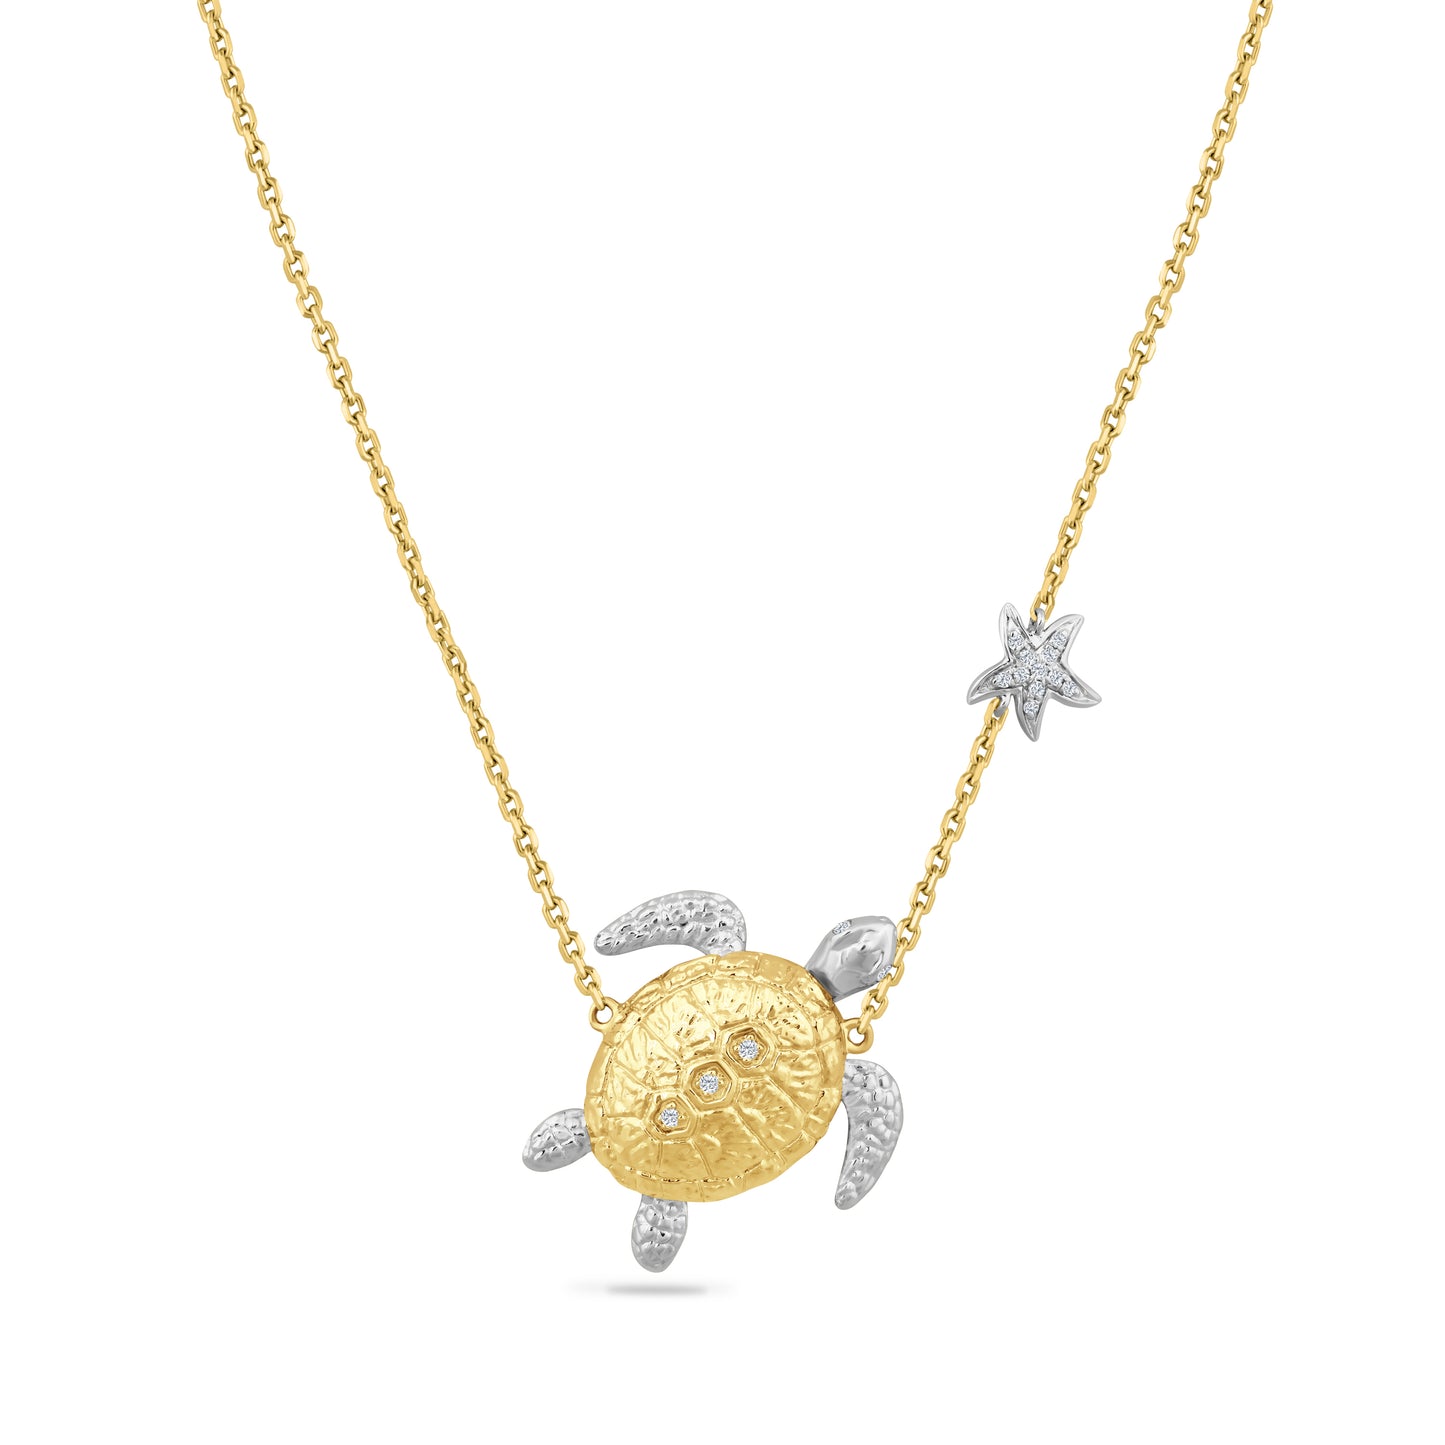 14K TWO-TONE DIAMOND TURTLE NECKLACE WITH 16 DIAMONDS 0.08CT WITH LITTLE DIAMOND STARS ON 18 INCHES CHAIN